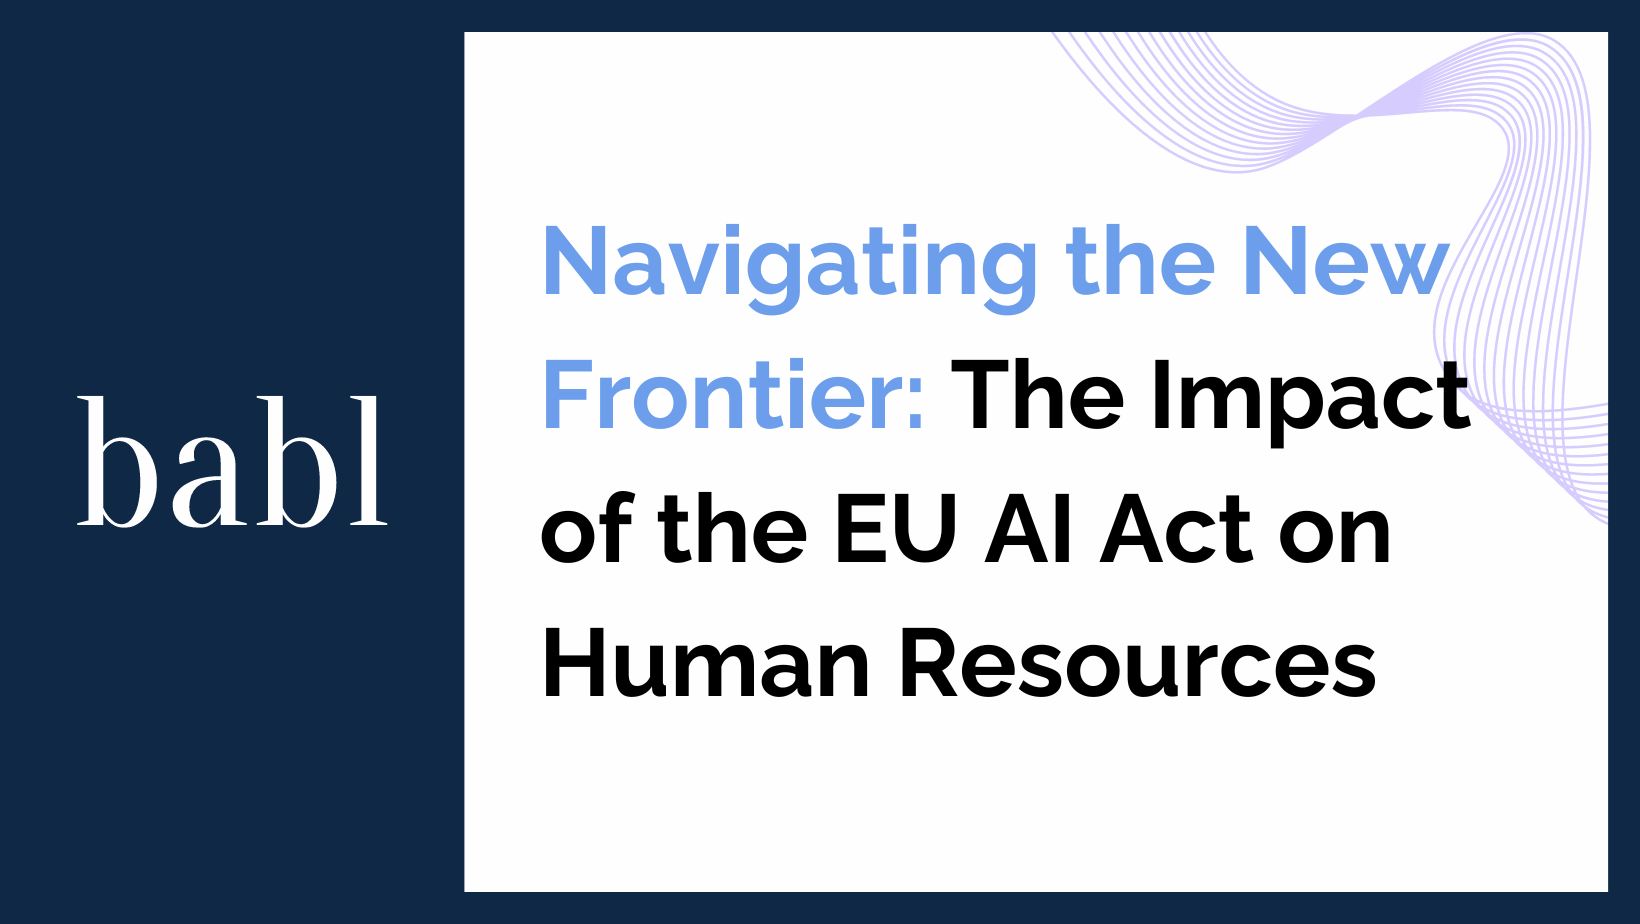 Navigating the New Frontier: The Impact of the EU AI Act on Human Resources